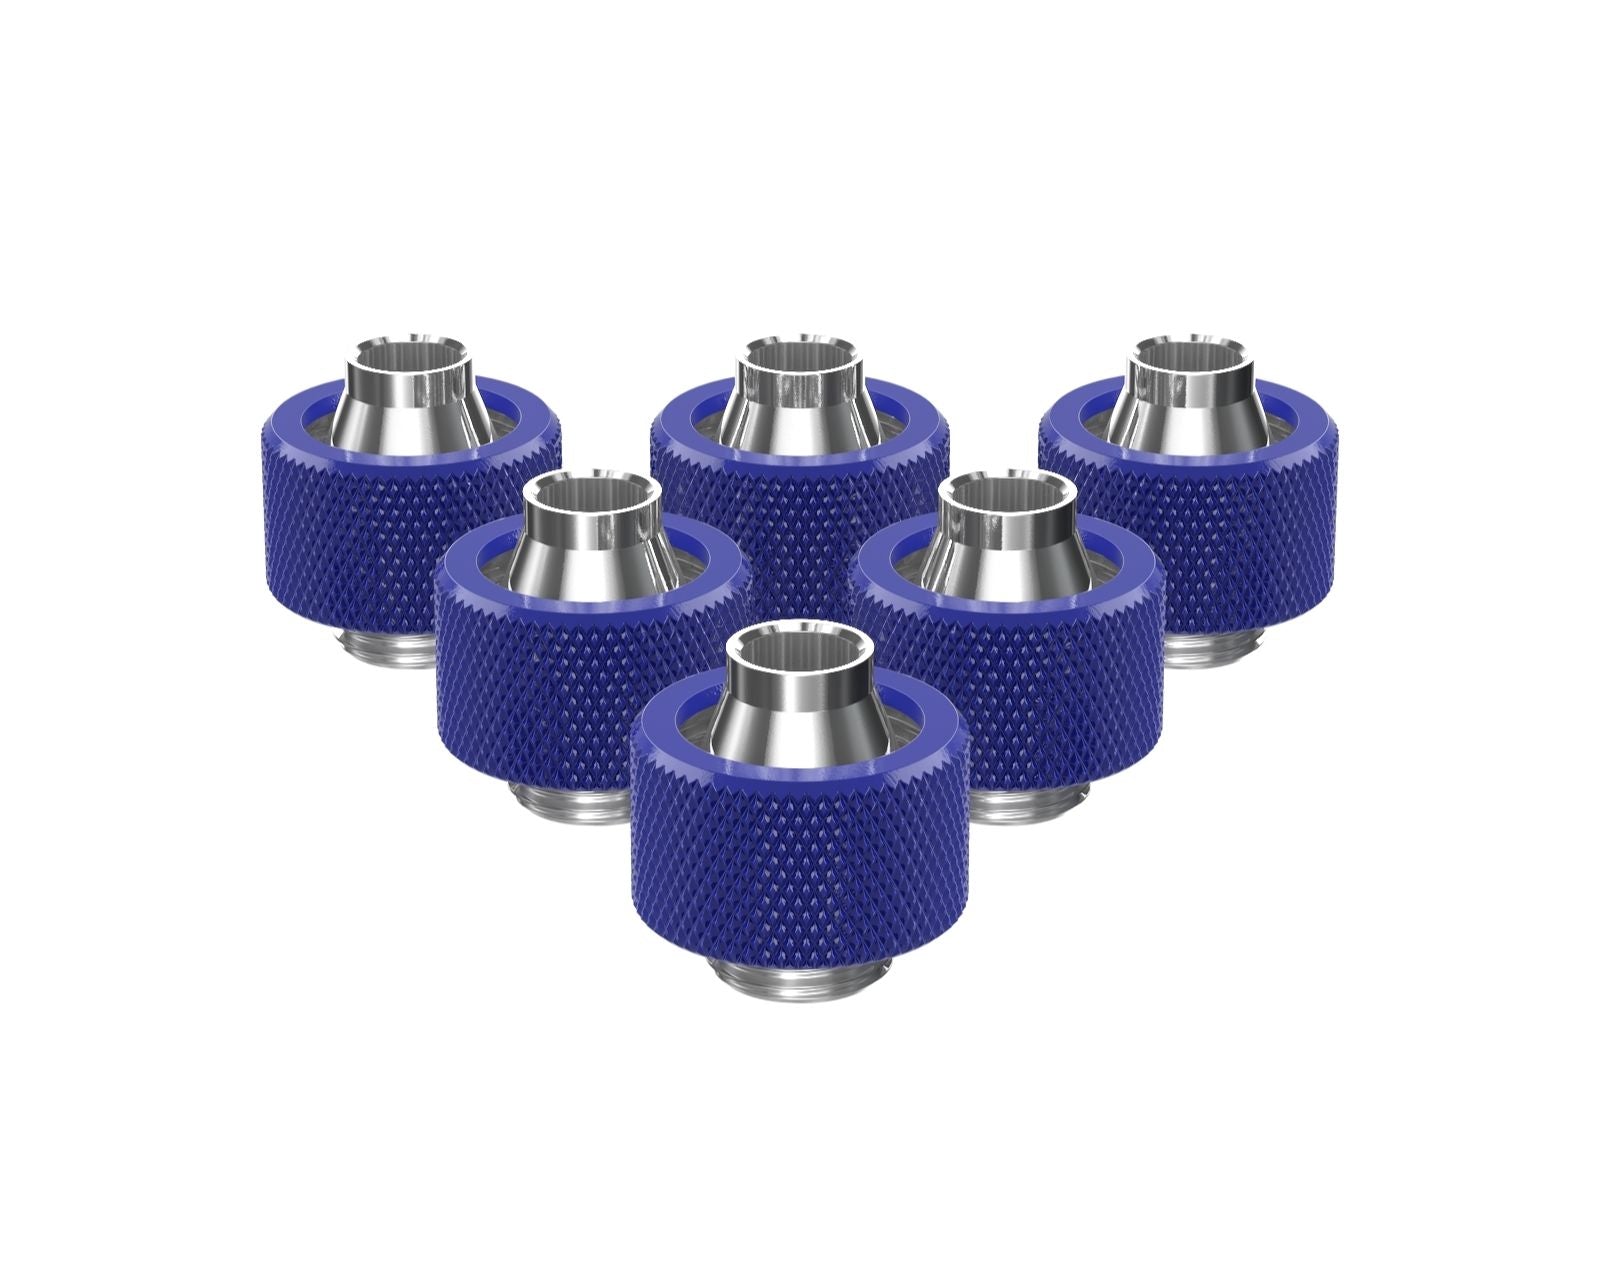 PrimoChill SecureFit SX - Premium Compression Fitting For 7/16in ID x 5/8in OD Flexible Tubing 6 Pack (F-SFSX758-6) - Available in 20+ Colors, Custom Watercooling Loop Ready - True Blue